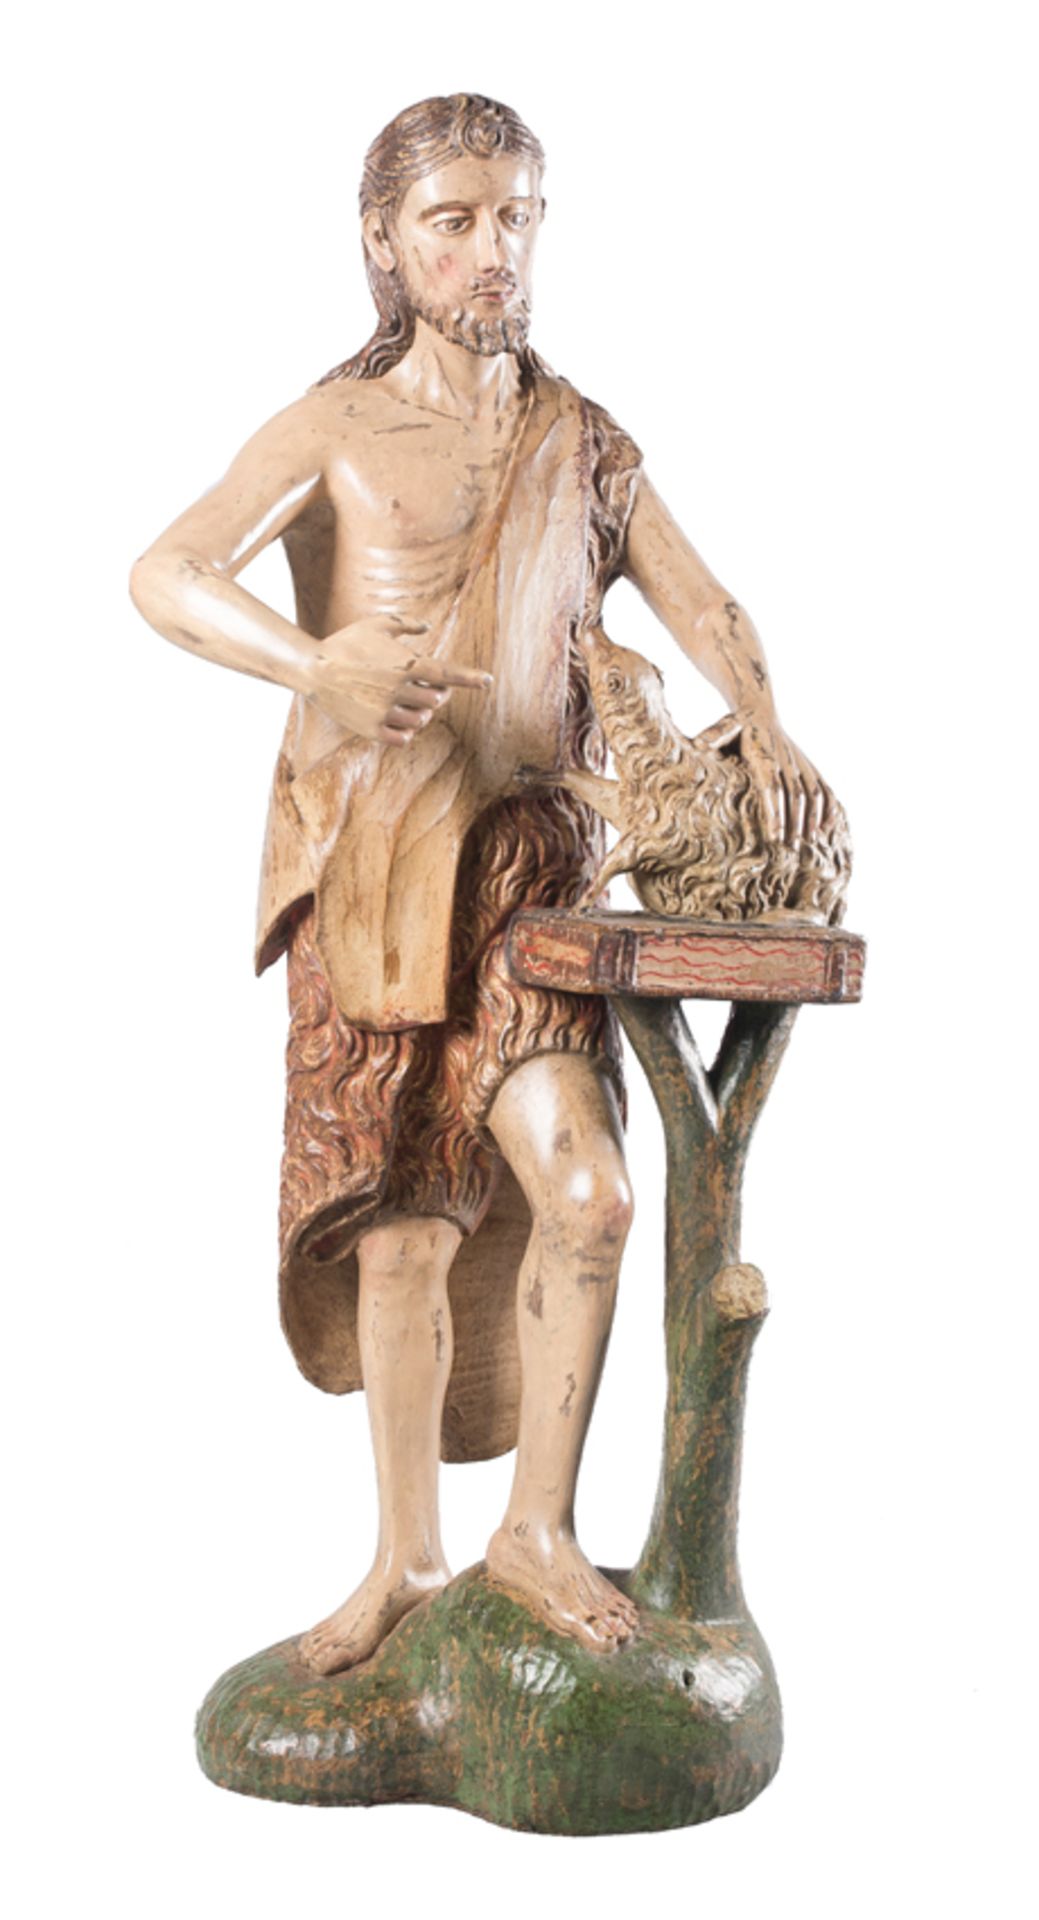 "Saint John the Baptist". Carved and polychromed wooden sculpture. Colonial School. 17th - 18th cent